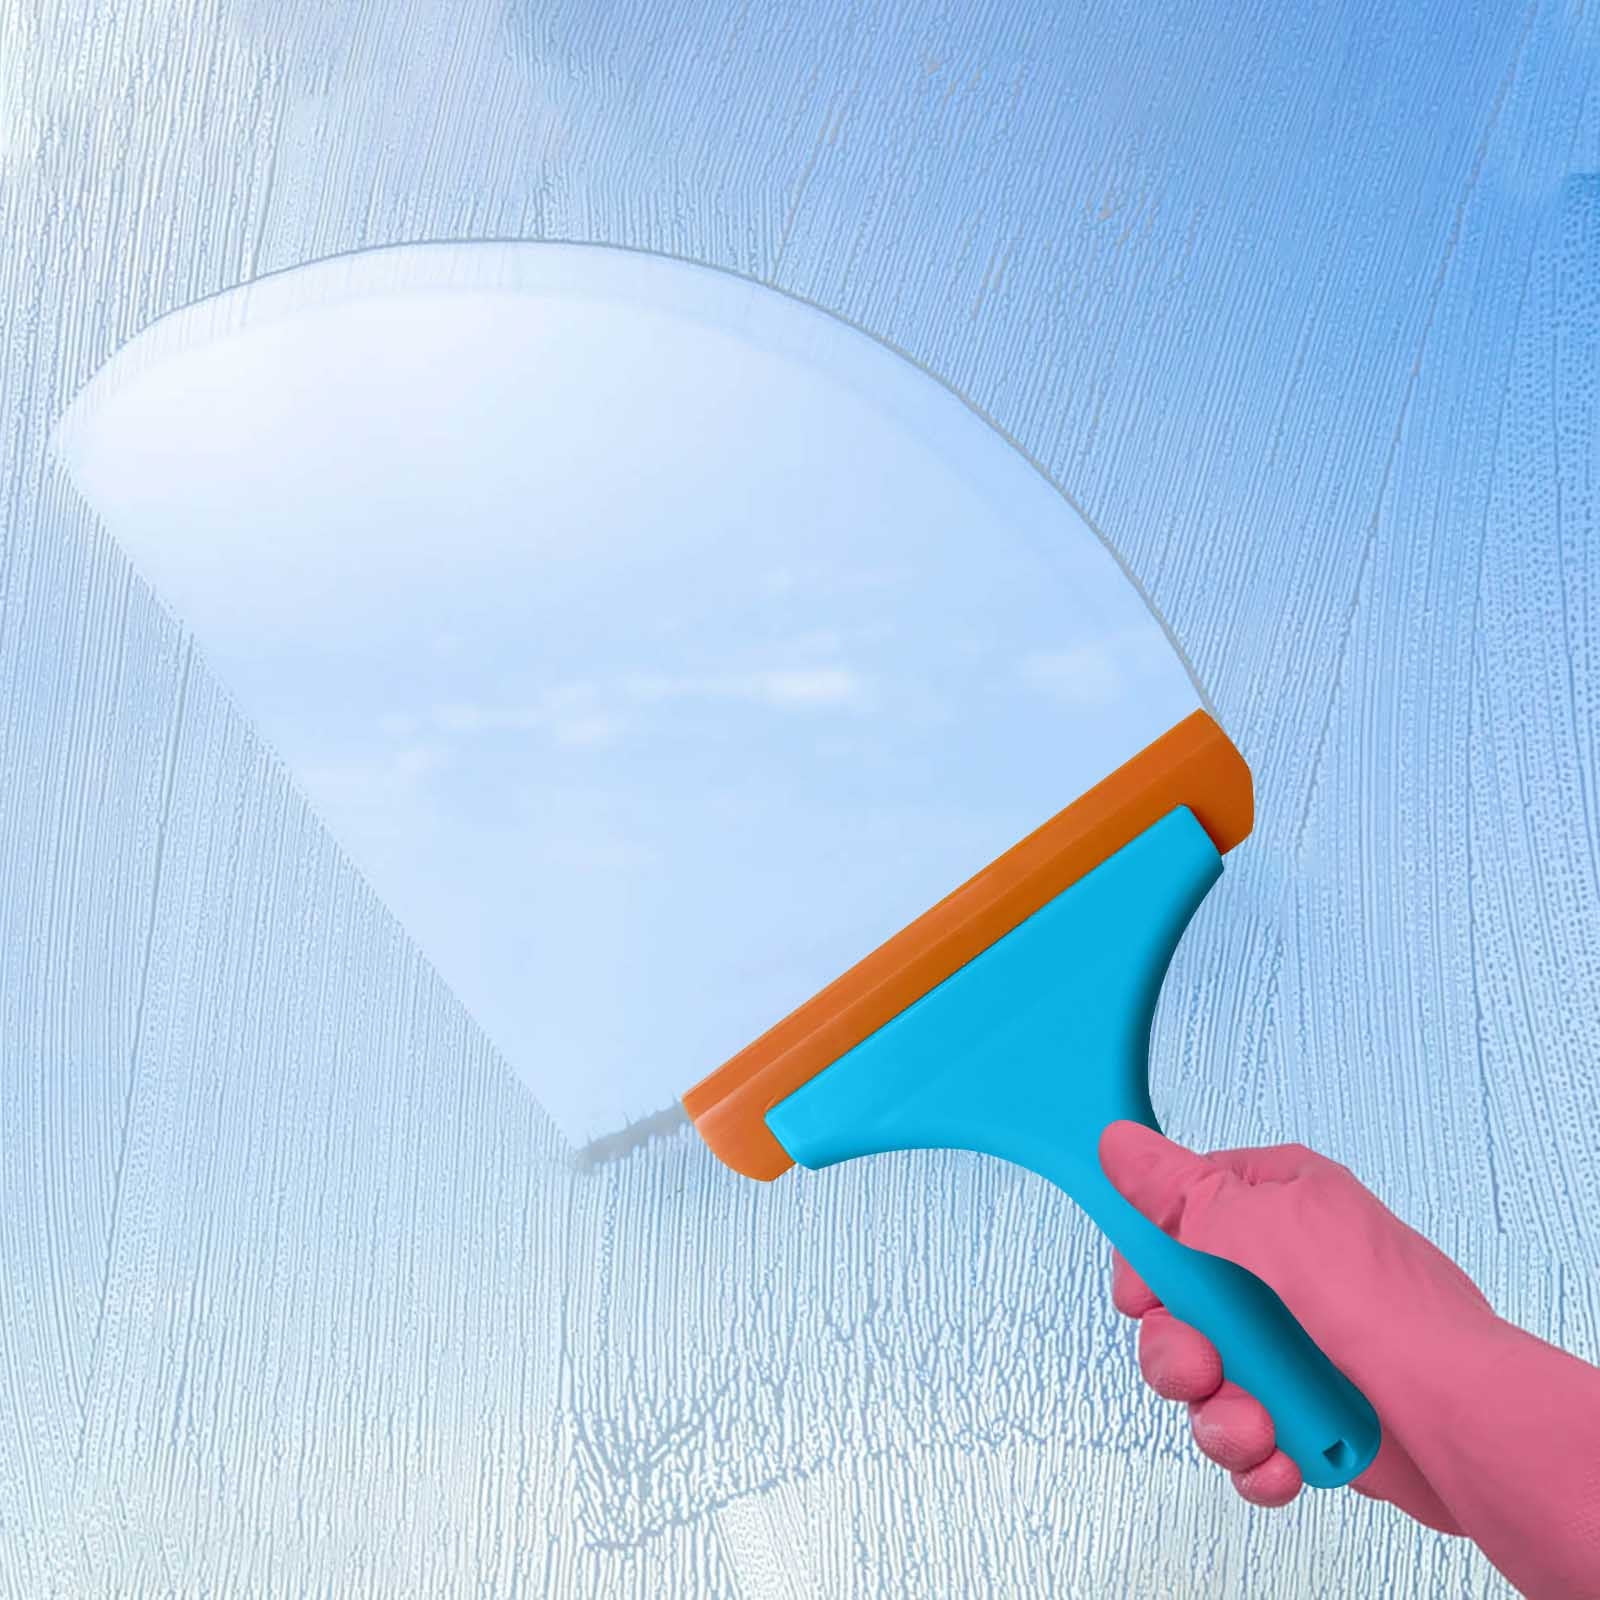  Gomake Small Rubber Squeegee Window Shower Squeegee Cleaning  Kit,Auto Water Blade Squeegee for Shower Glass Door,Car Windshield, Window,  Mirror, Bathroom,Countertop Cleaning : Health & Household